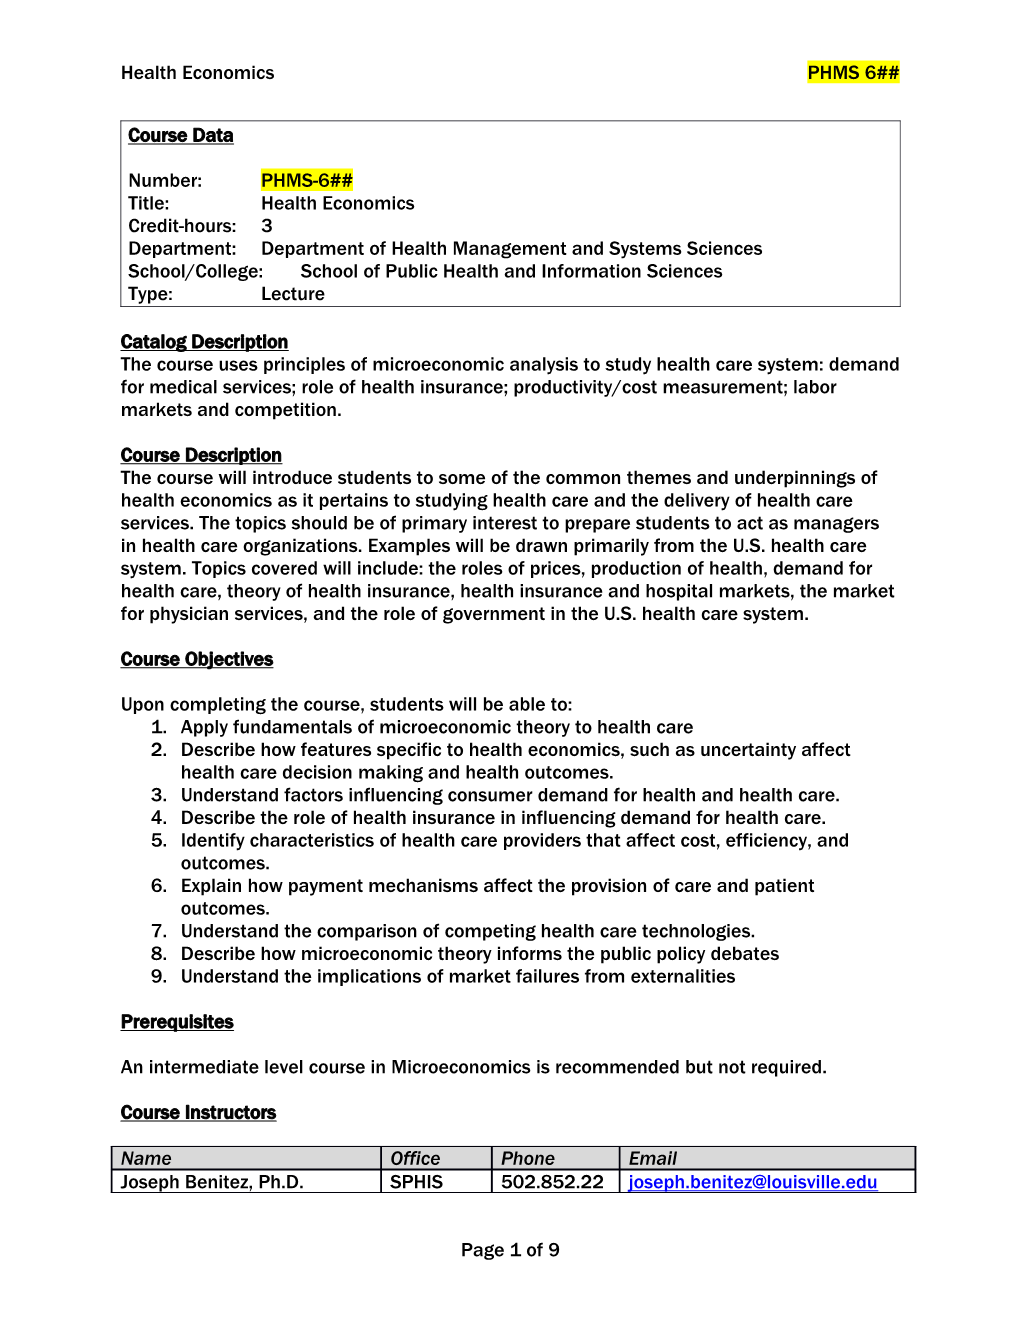 Course Syllabus (Approved) Template, Version 9